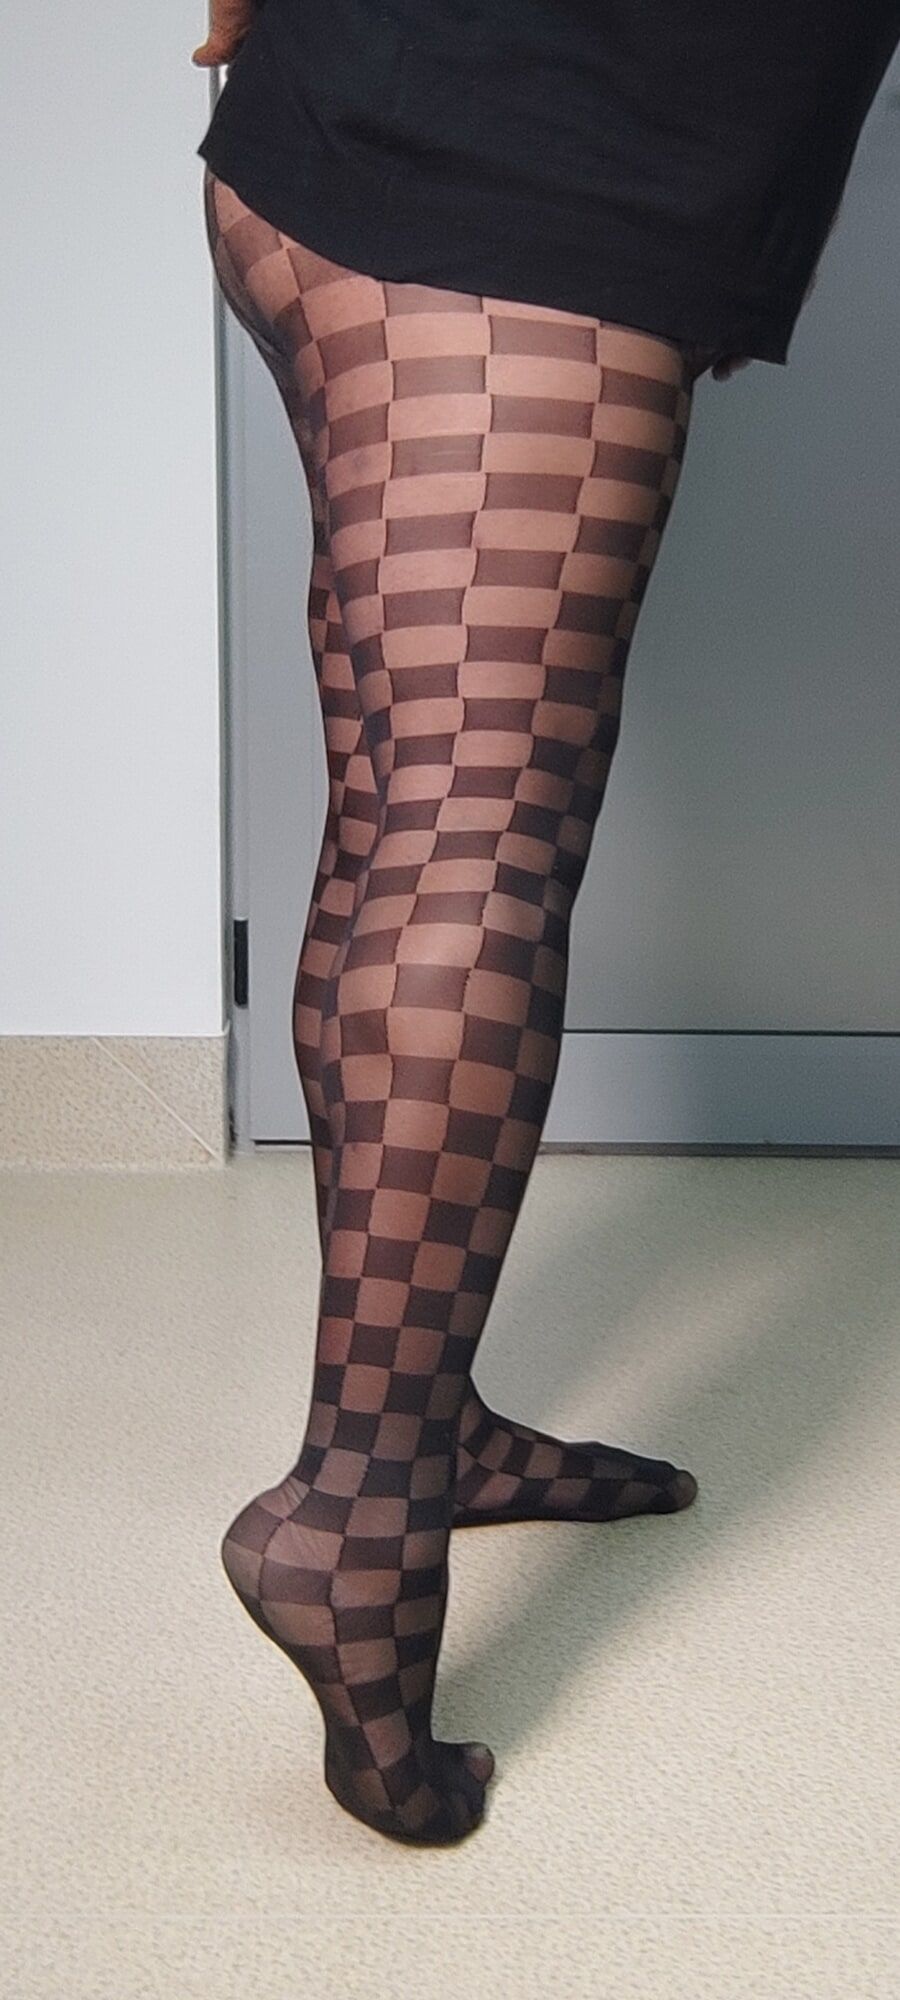 Black patterpantyhose on my sexy feet are so cool.Am i sexy? #15